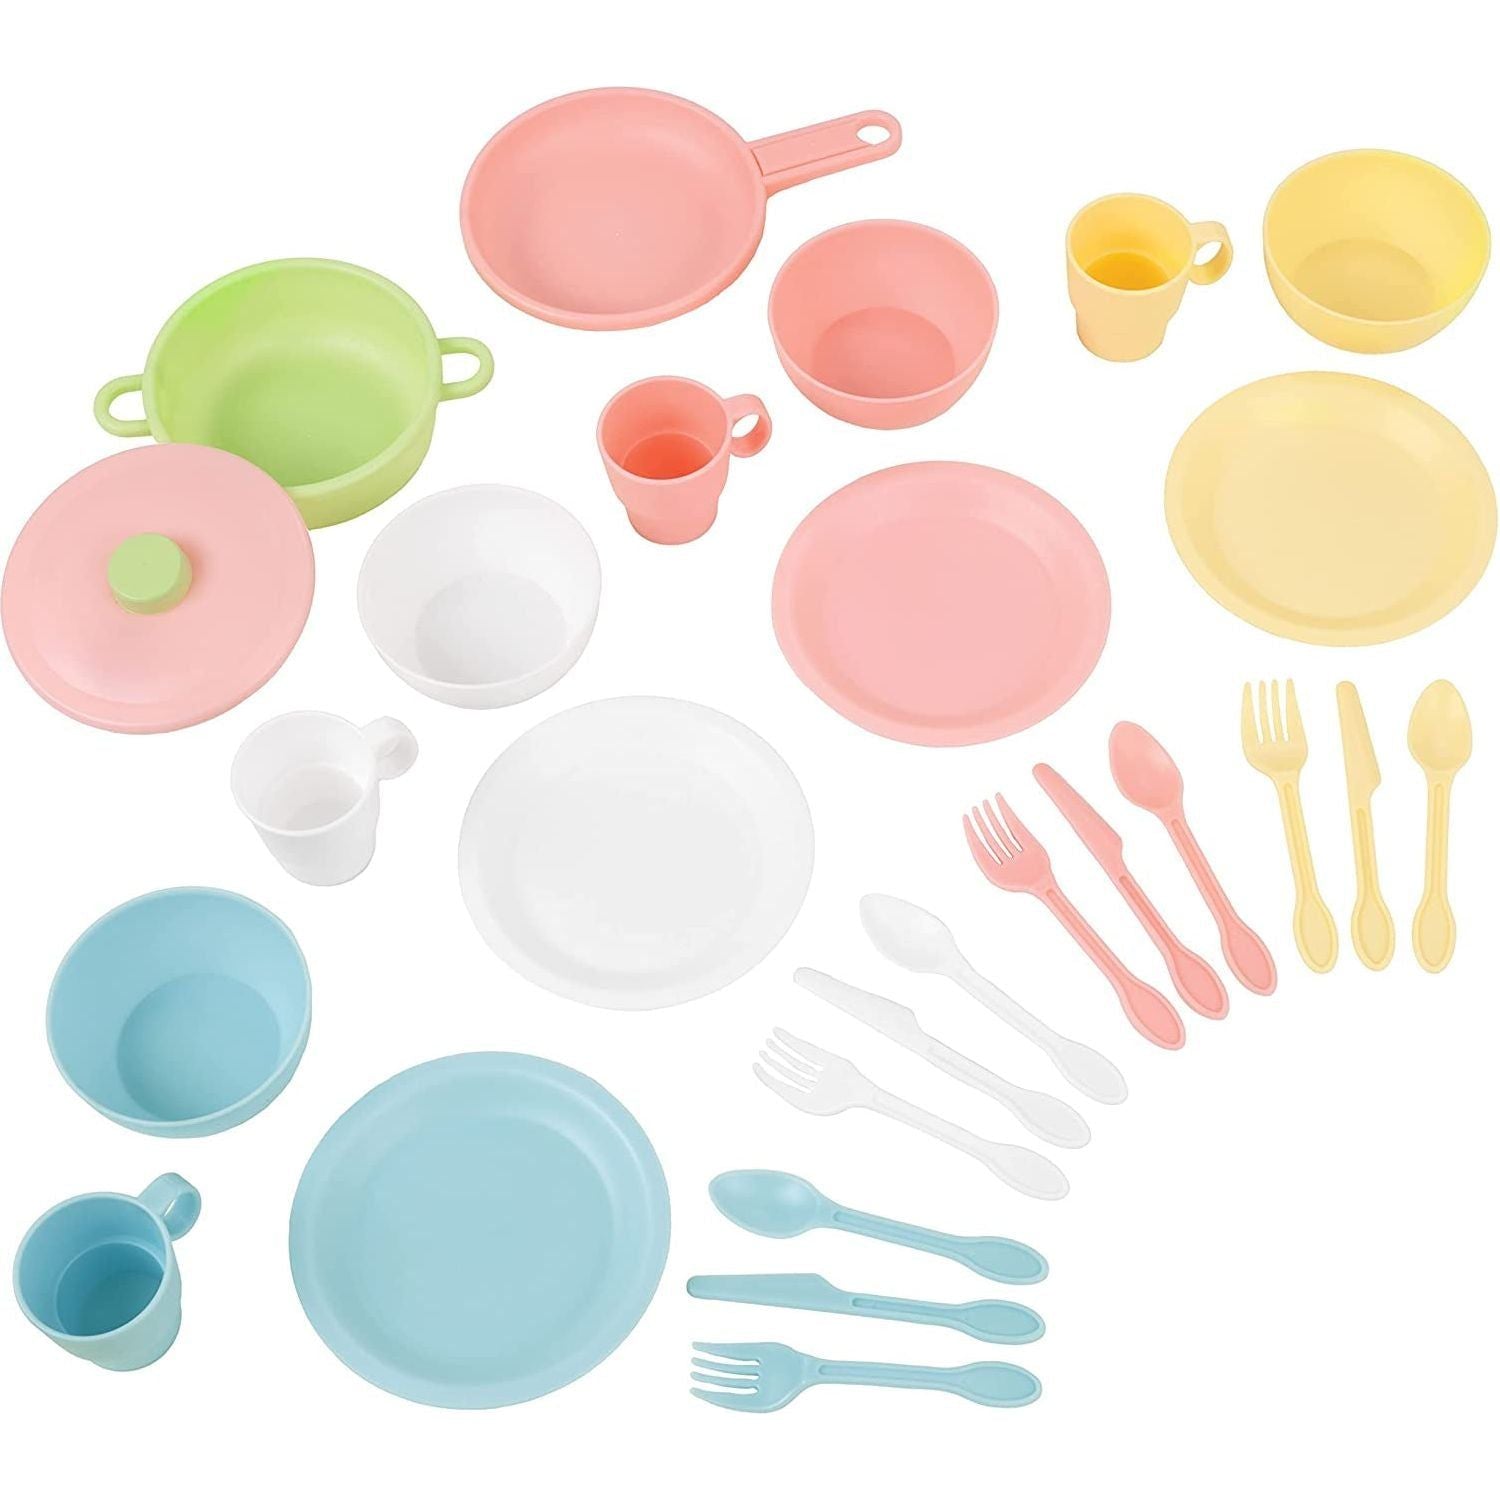 27-Piece Pastel Cookware Set, Plastic Dishes and Utensils for Play Kitchens, Gift for Ages 18 Mo+